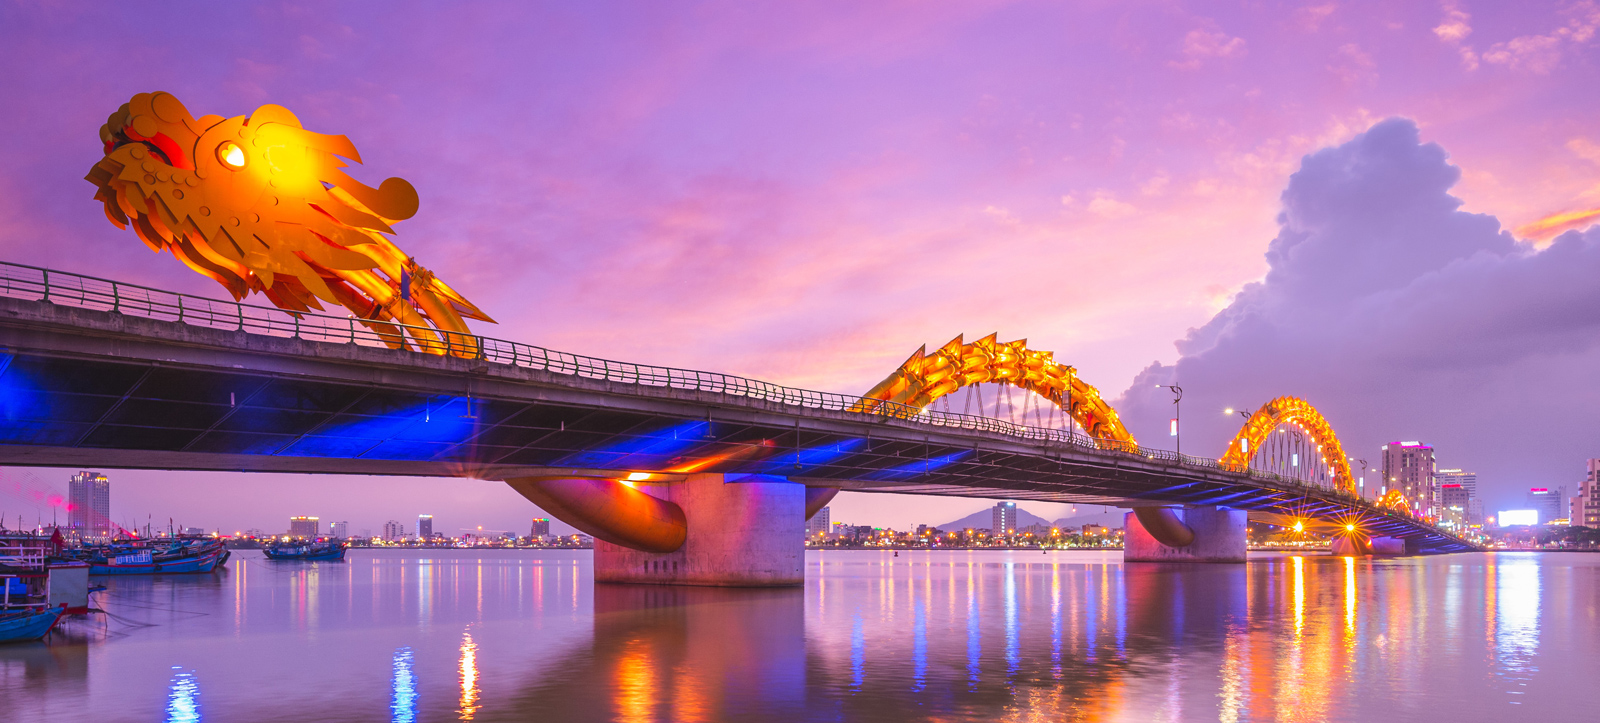 Dragon bridge in Vietnam, a colorful, fiery dragon undulates along a bridge with a city skyline in the background